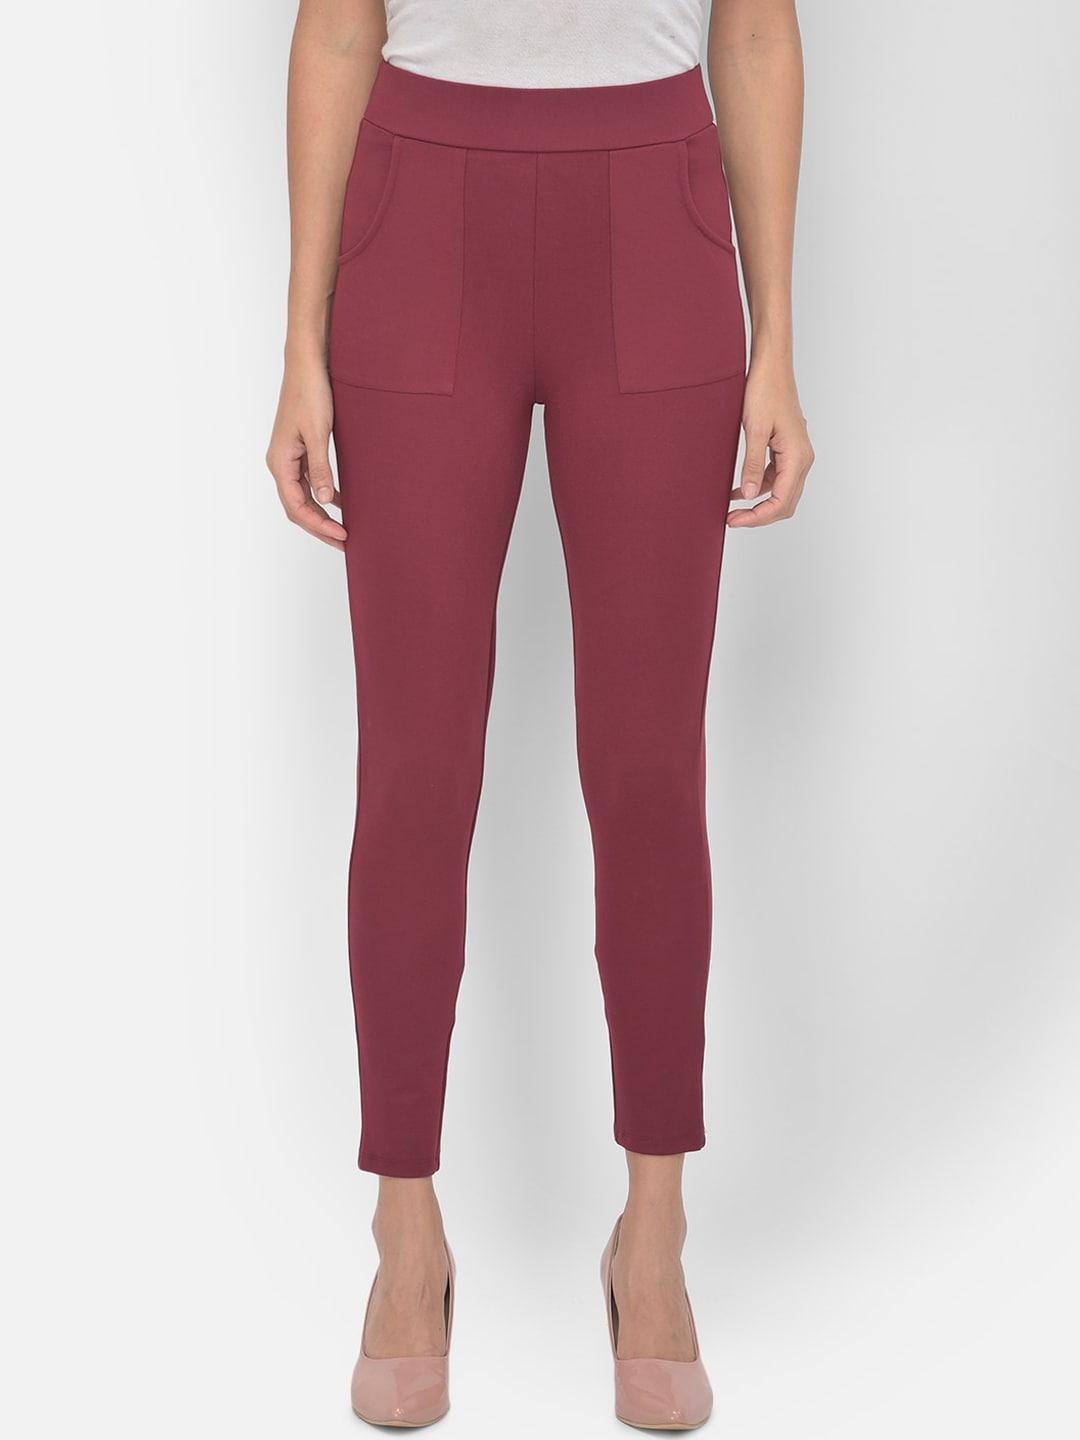 latin quarters women maroon solid jeggings with pockets